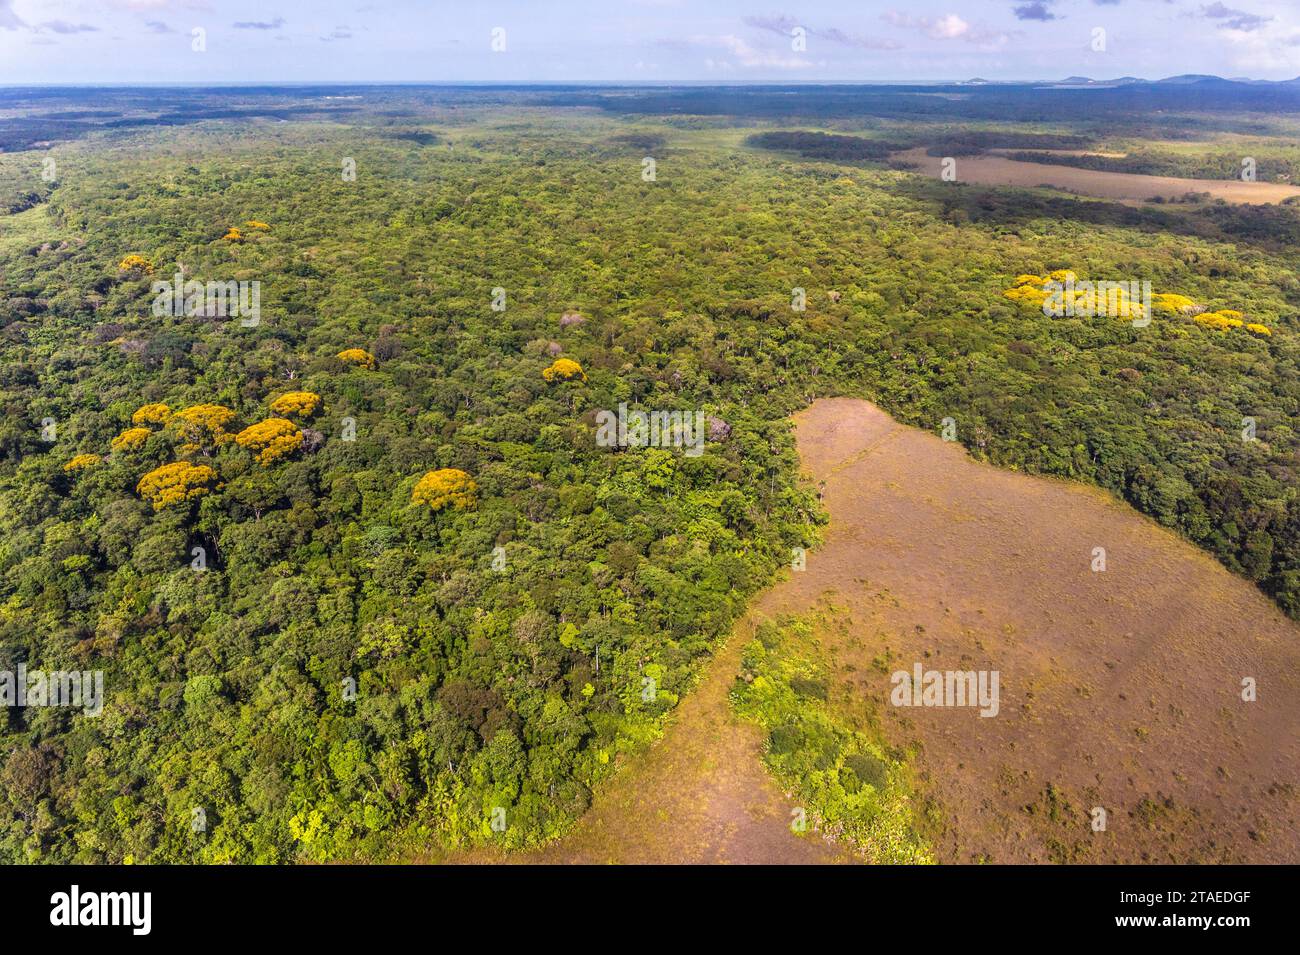 France, Guiana, Cayenne, Aerial view of the Amazon rainforest and savannahs (aerial view) Stock Photo